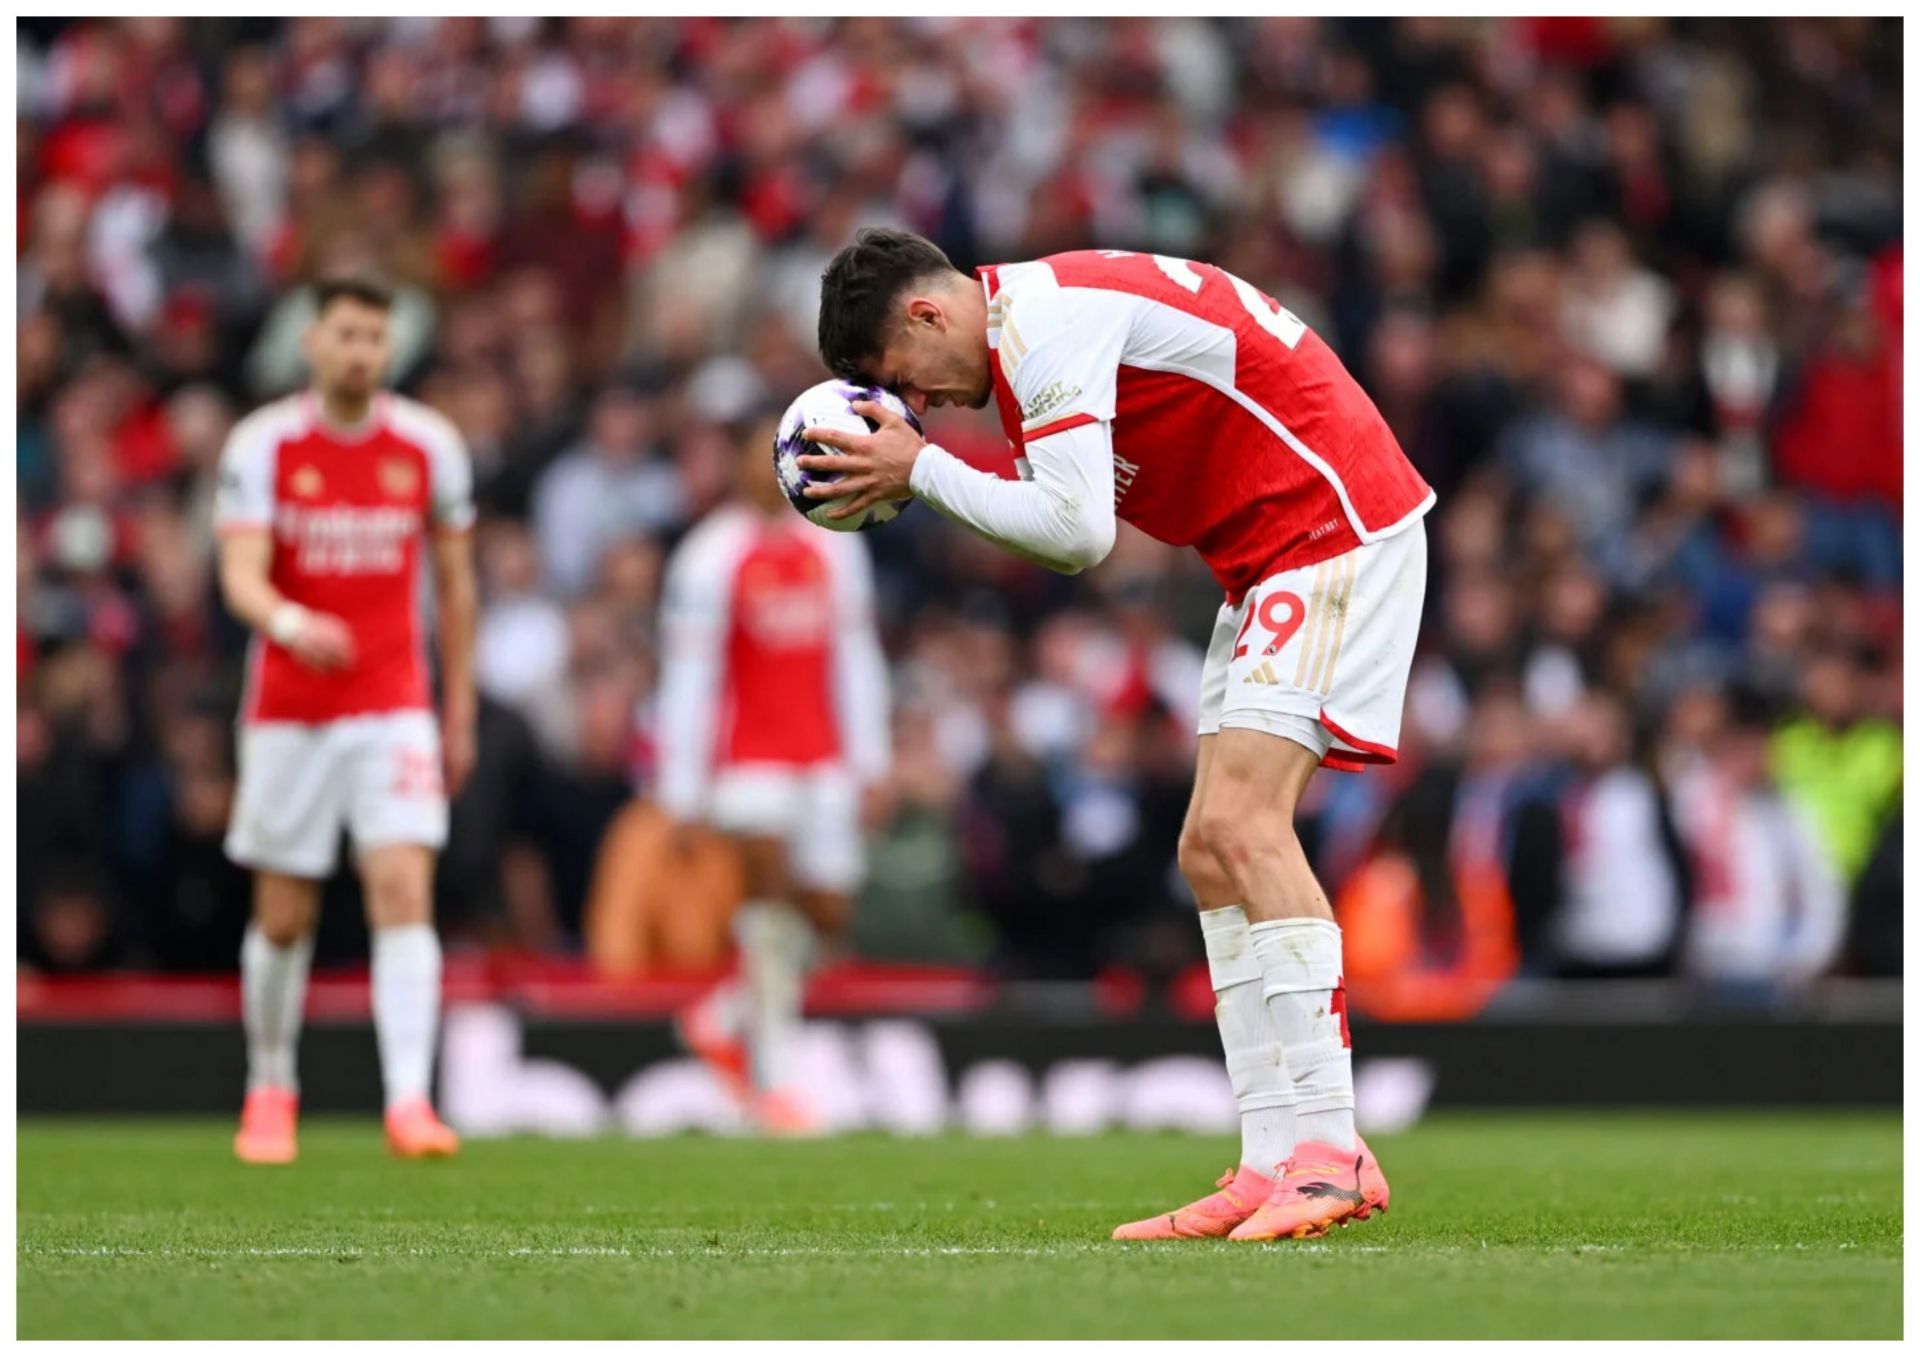 Arsenal suffered a major upset after the home loss to Aston Villa (Photo by Shaun Botterill/Getty Images)